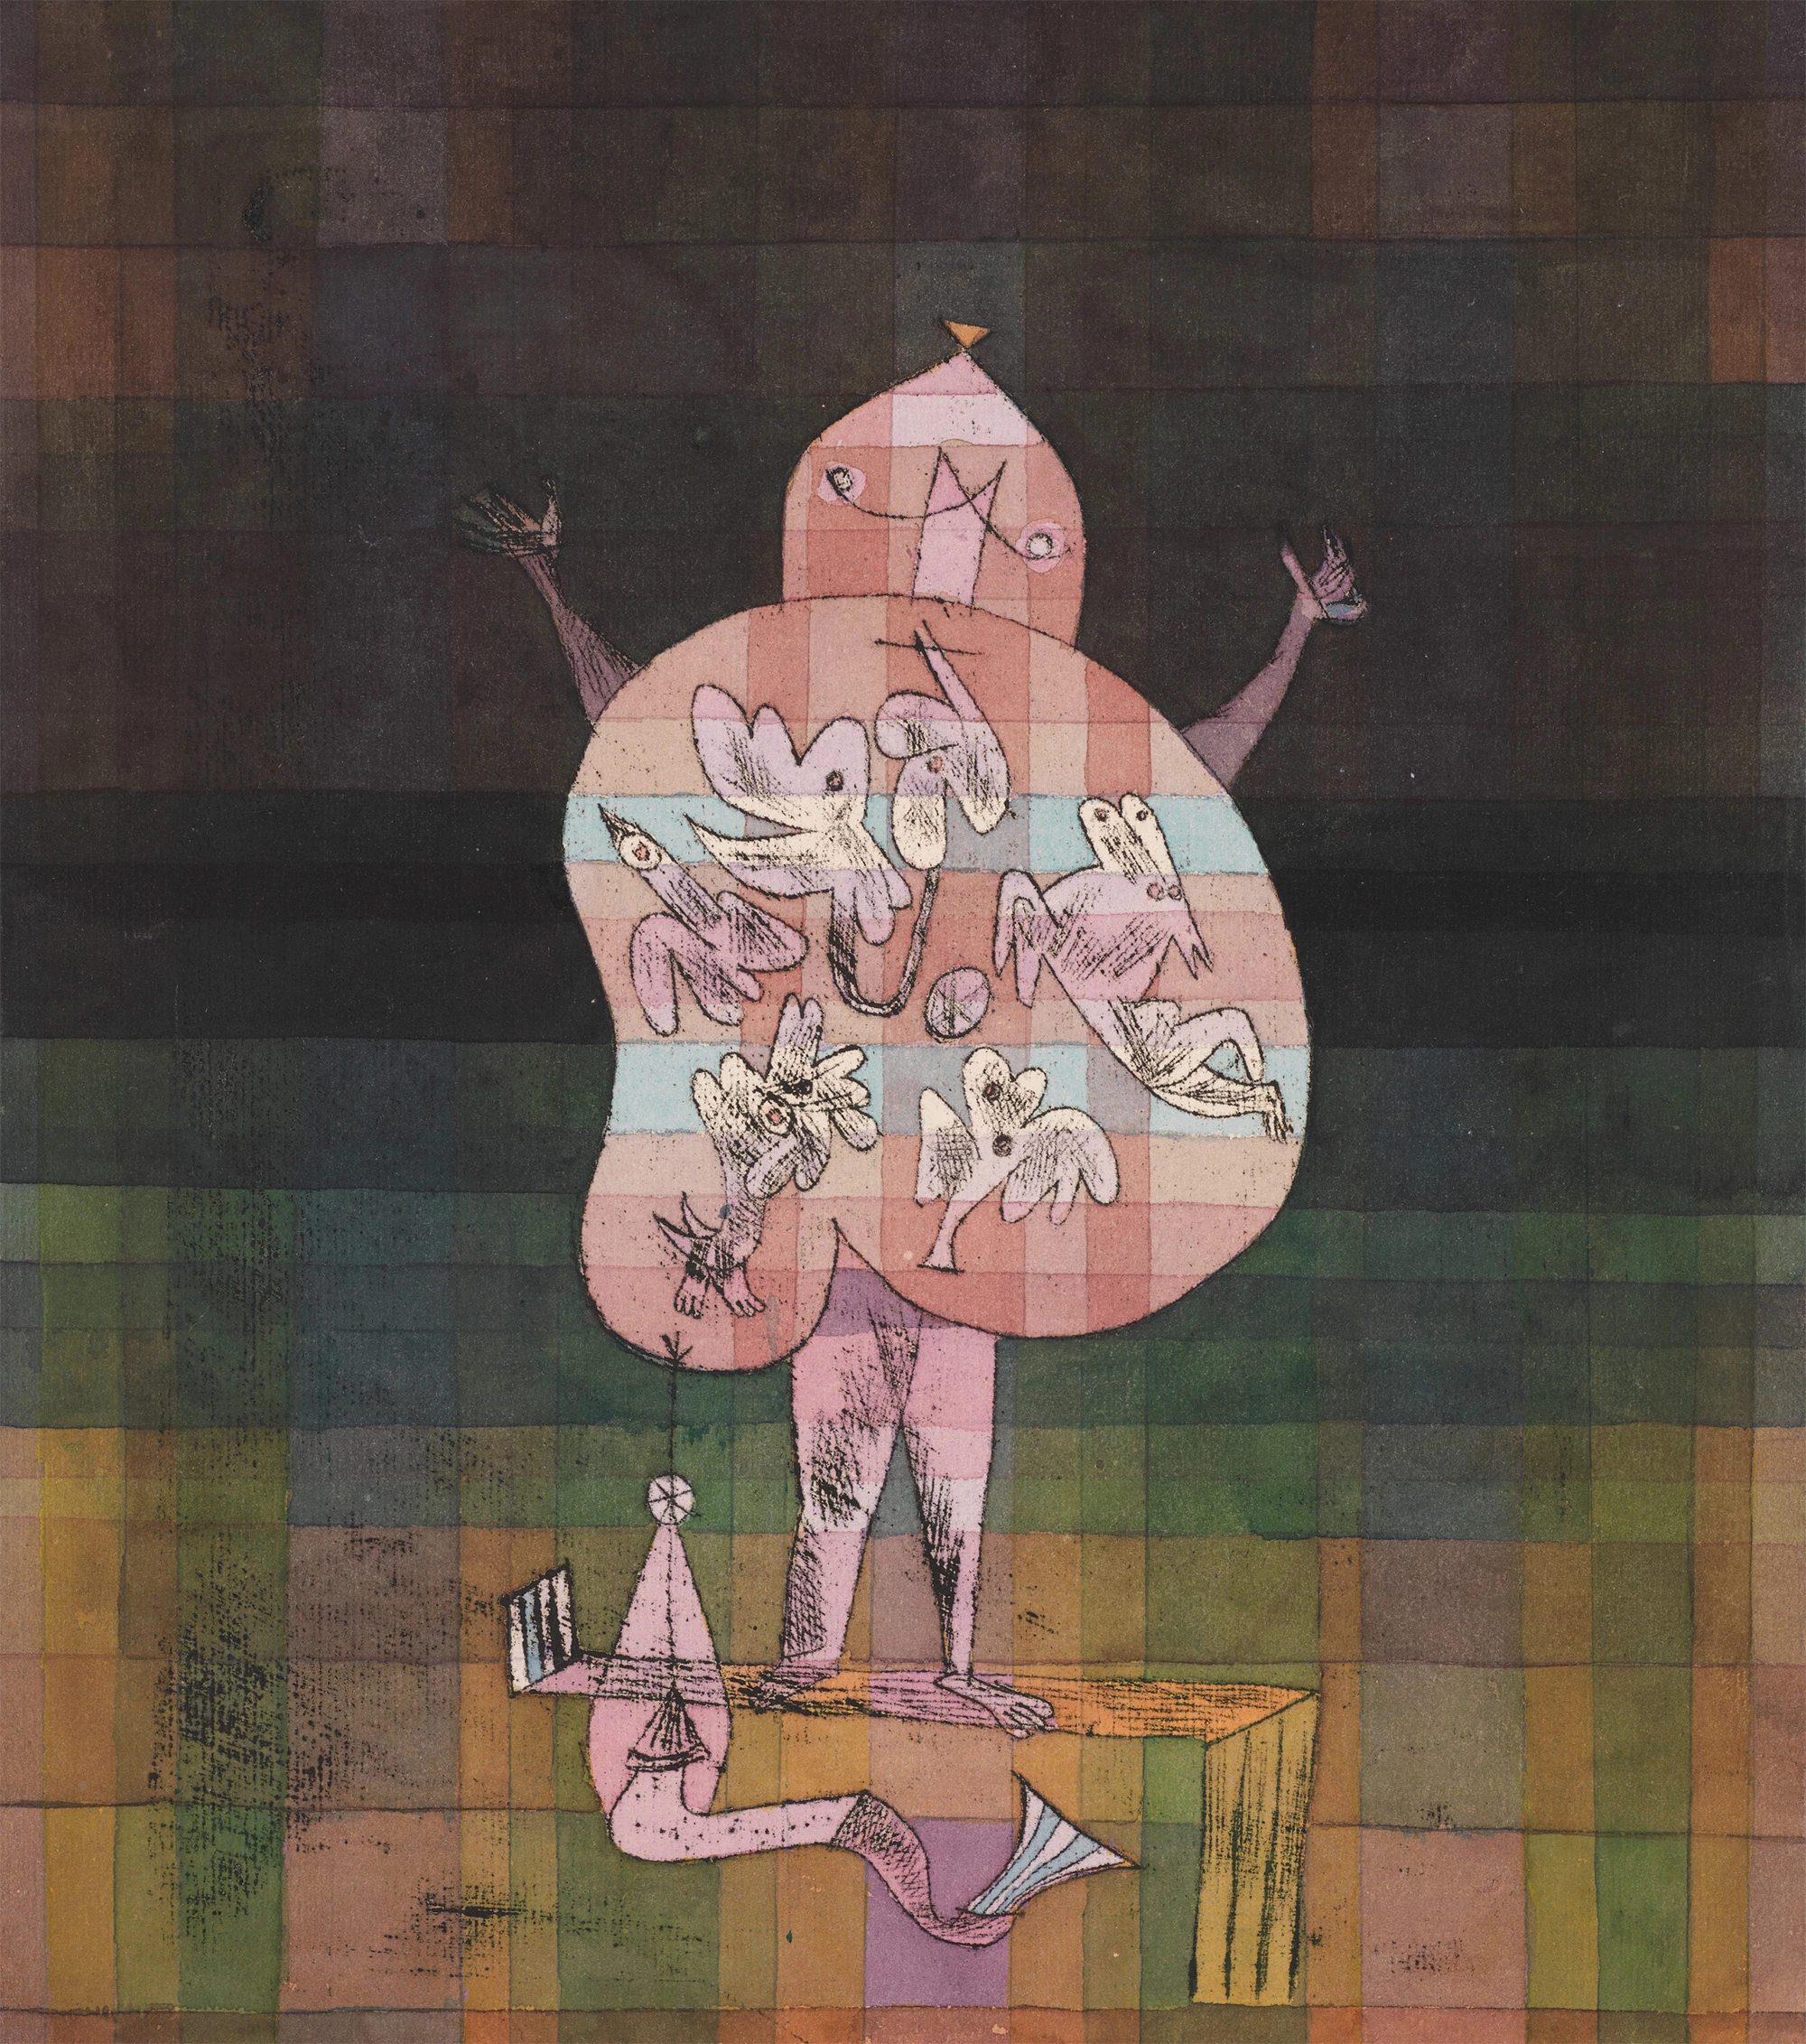 Paul Klee, The Artists